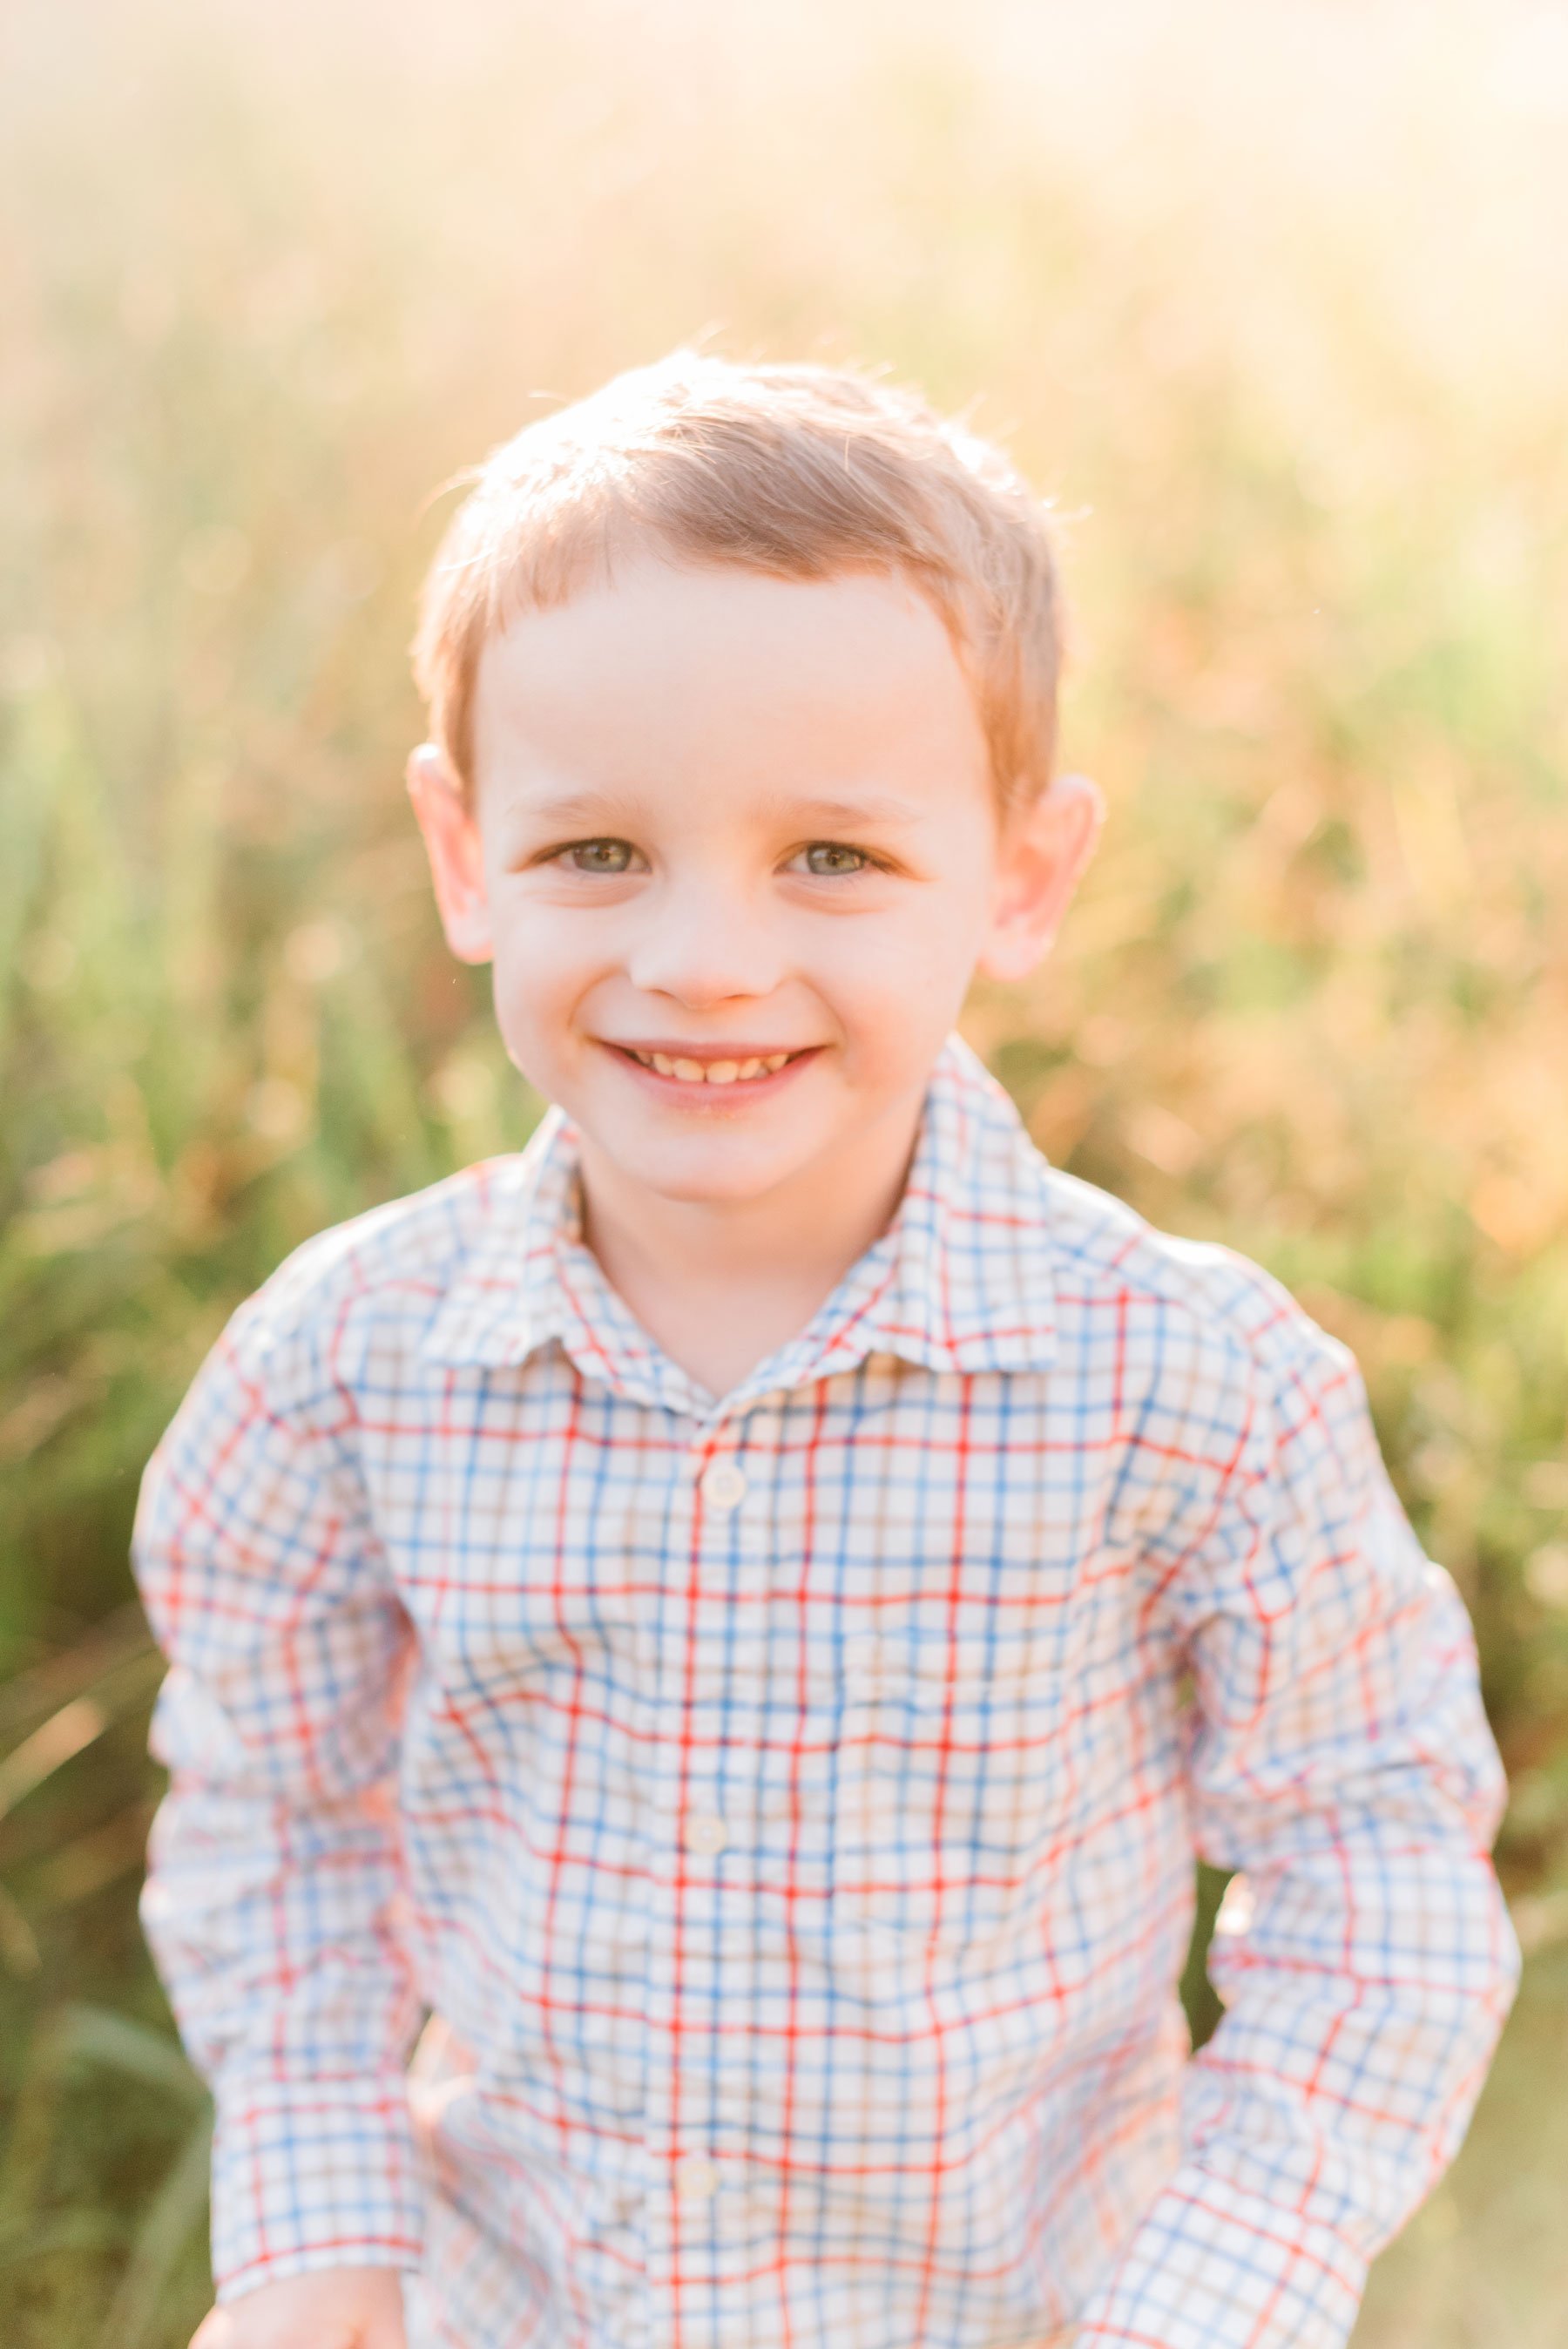    Henry smiles for his handsome solo portrait in his long sleeved button down shirt . #marylandfamilyphotographer #findingafamilyphotographer #familyphotooutfits #semiformalphotooutfits #outdoorfamilysession #photoswithkids #georgiafamilyphotos #sib